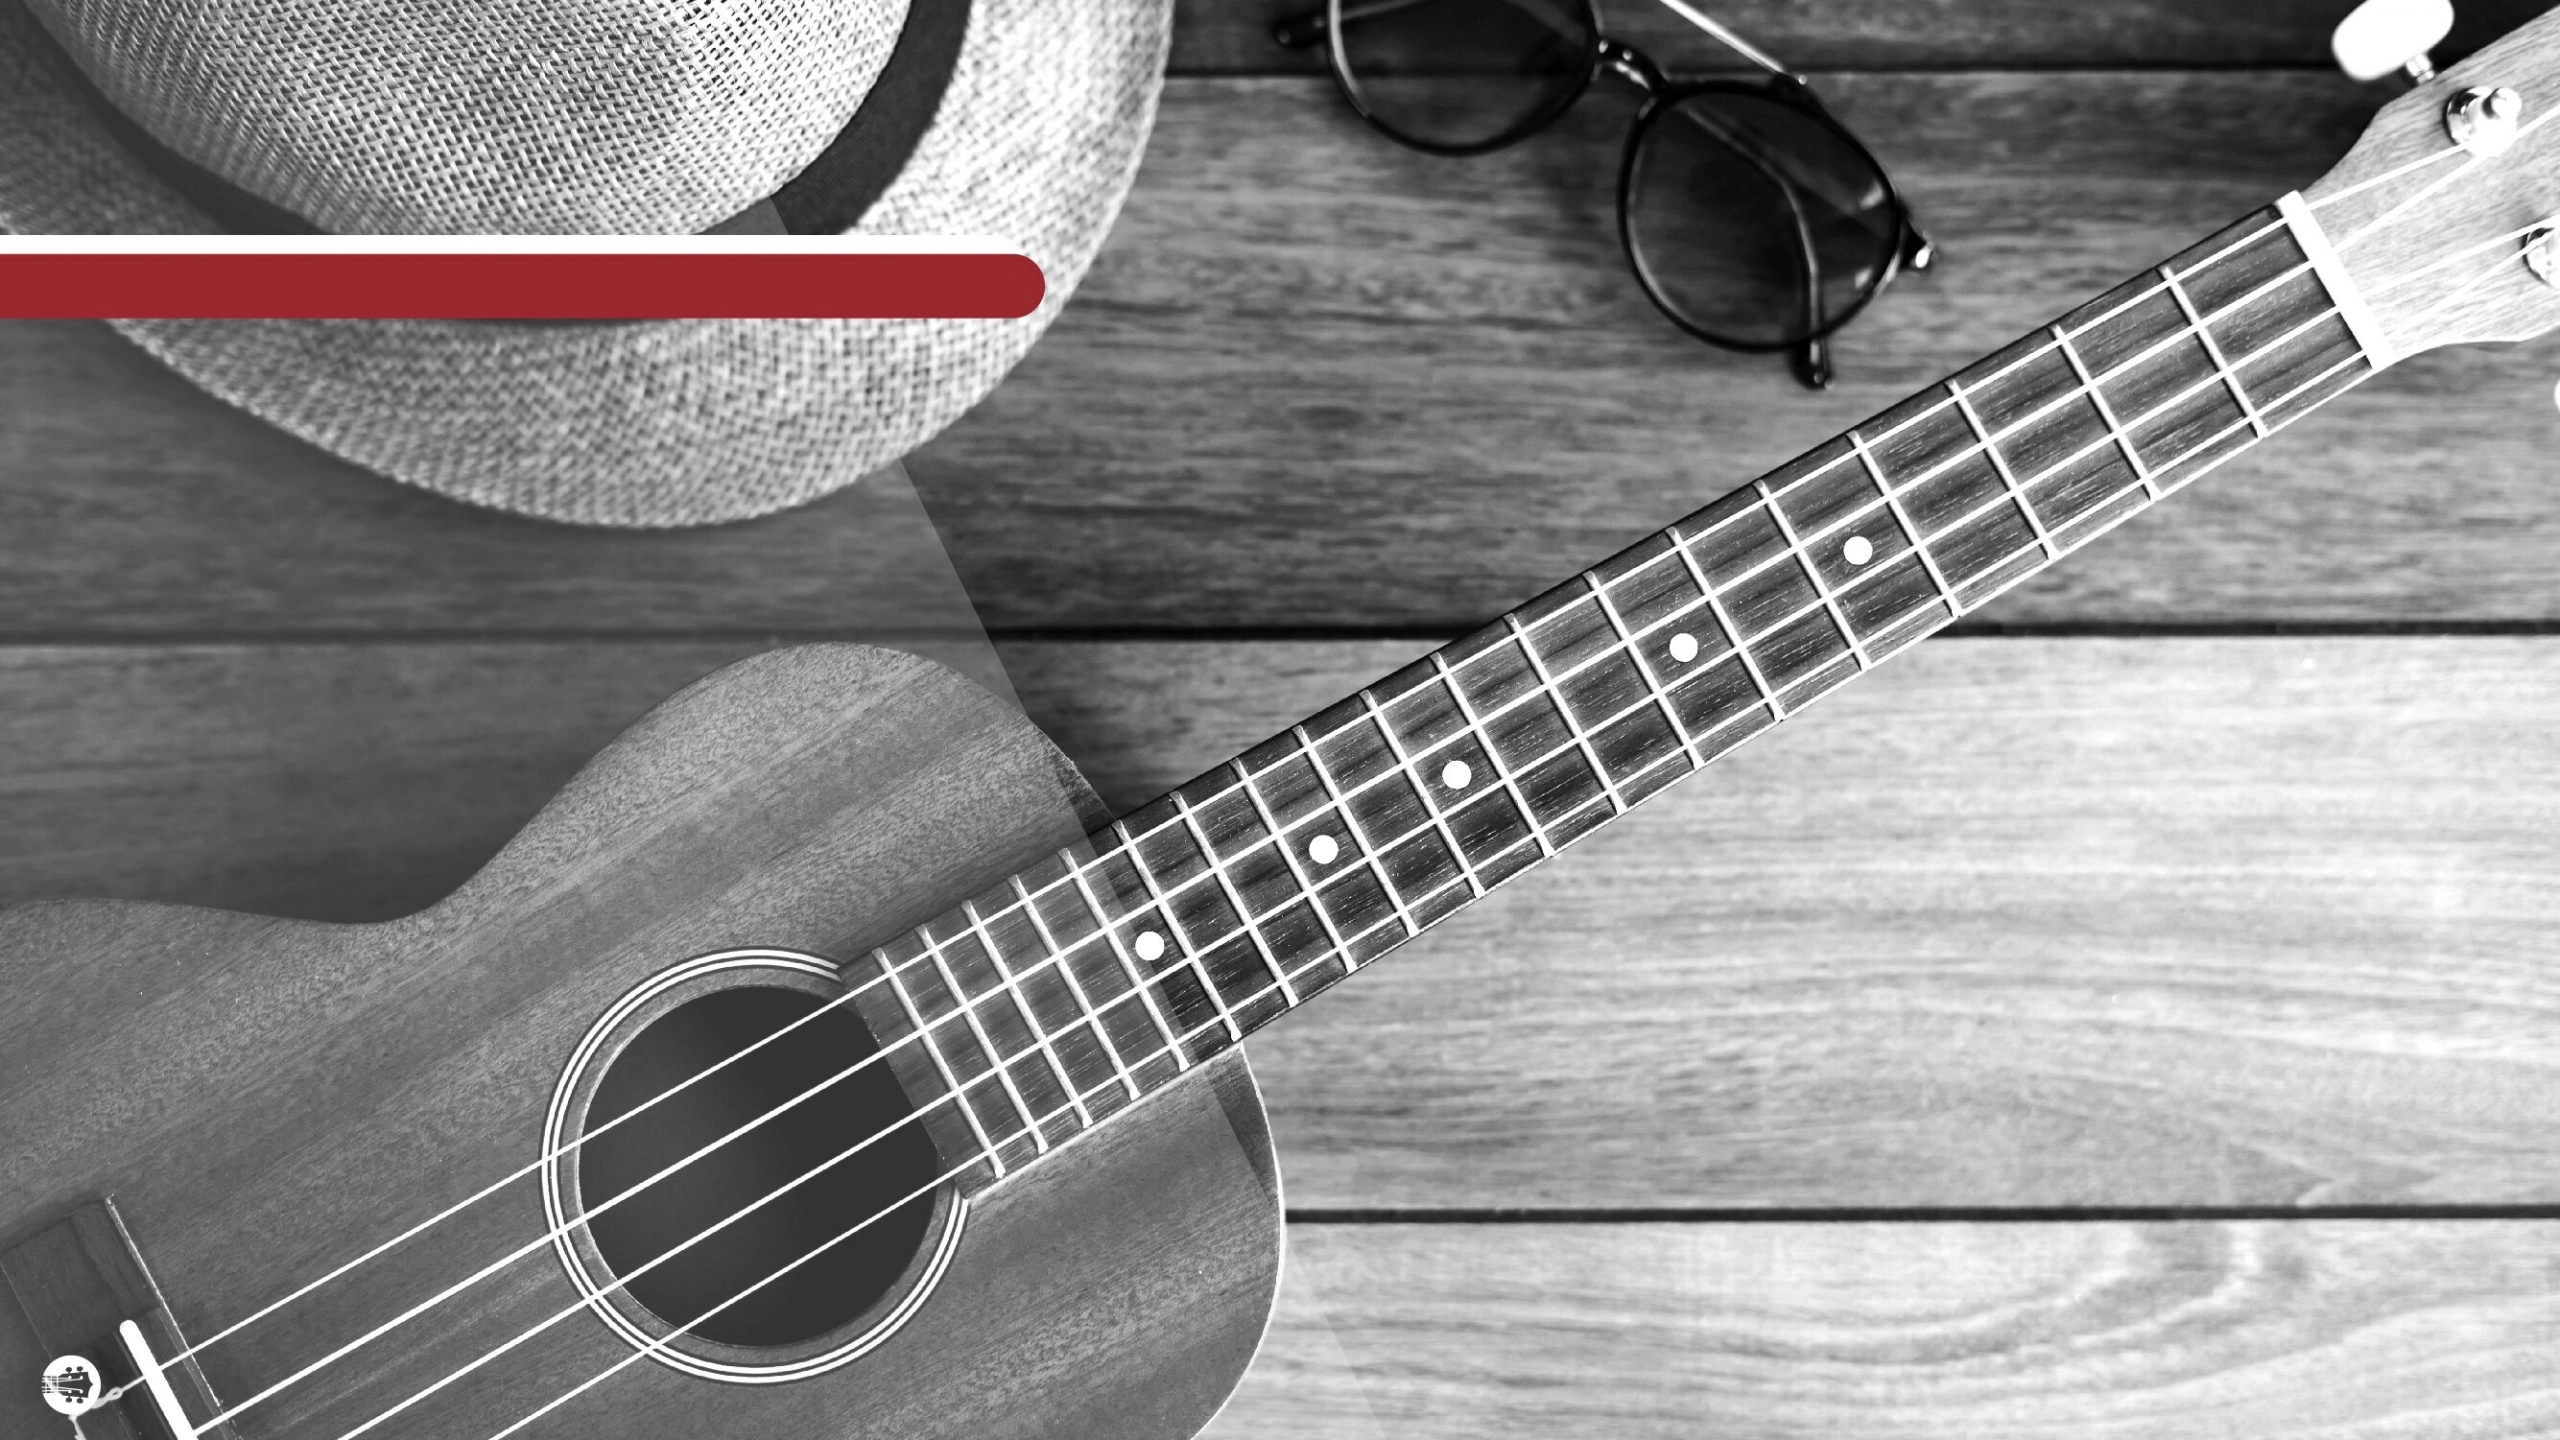 Ukulele: Monochrome, Read chords, Small size, Vibrant and cheerful sound, Musical instrument. 2560x1440 HD Wallpaper.